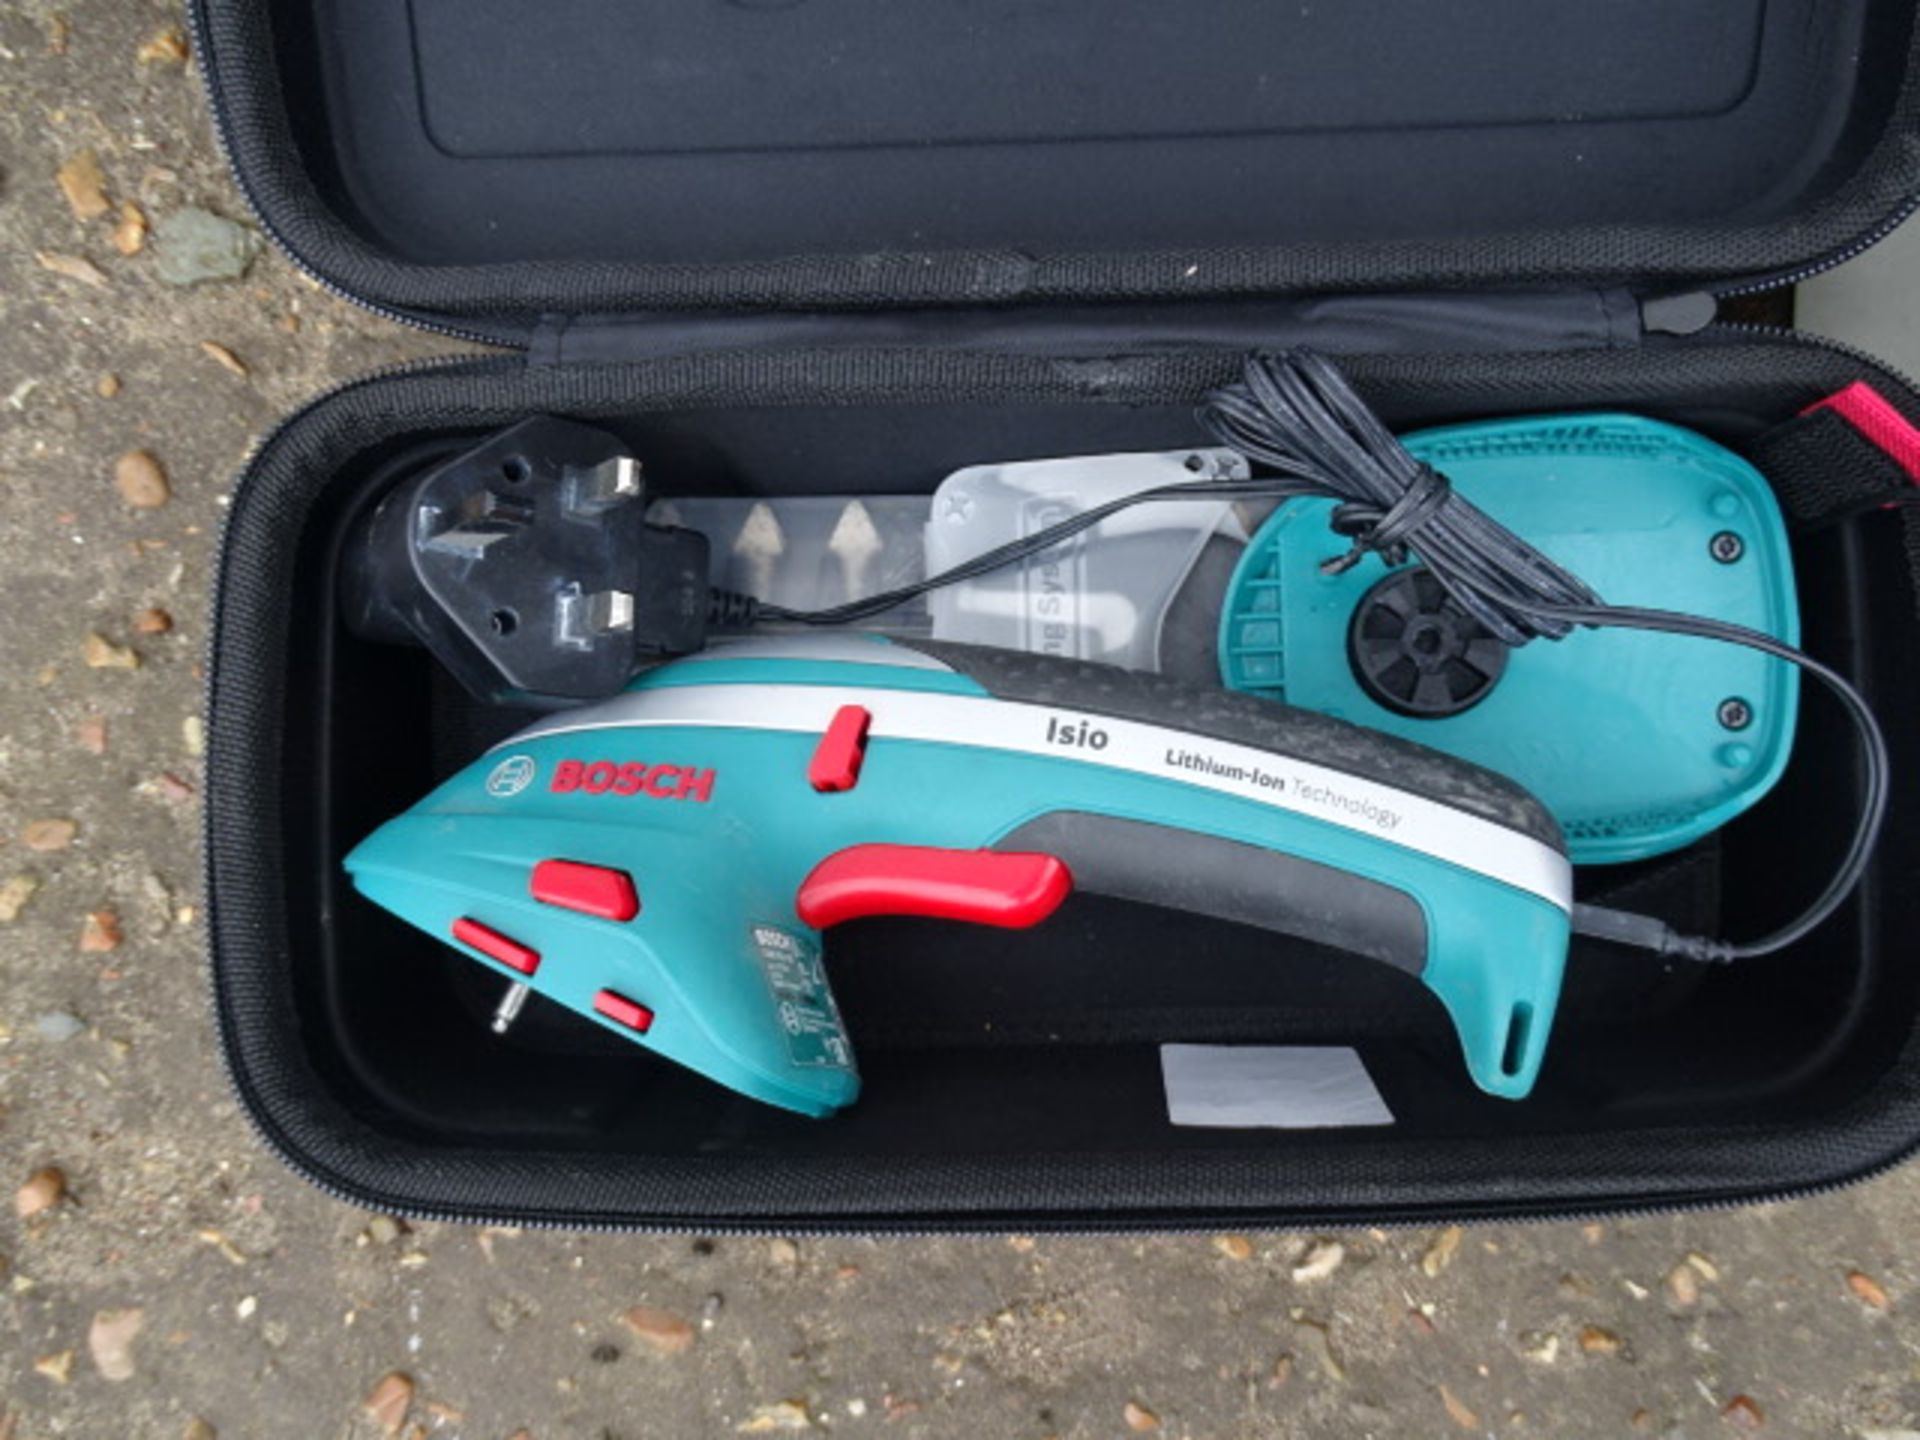 Bosch cordless lithium drill, garden trimmer and Black & Decker sander, all from a house clearance - Image 3 of 7